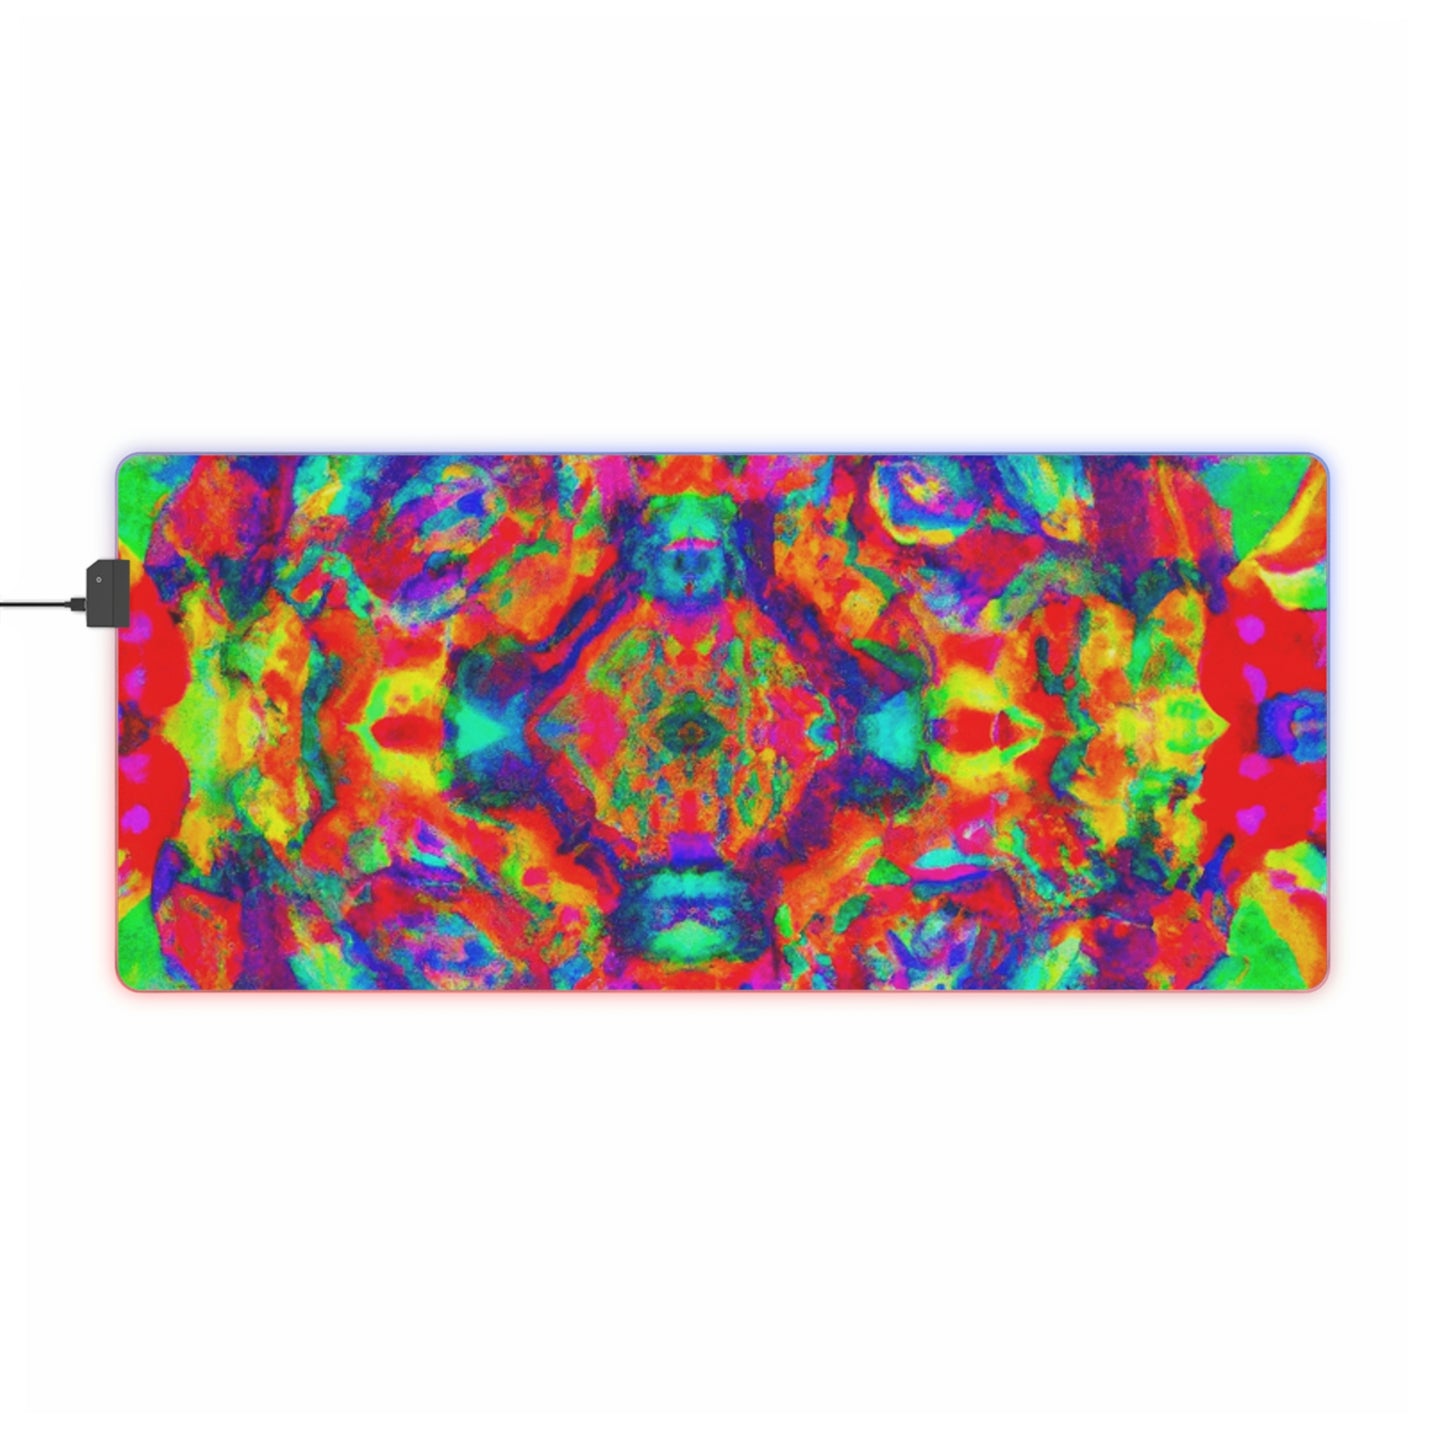 Alan Rocketblast - Psychedelic Trippy LED Light Up Gaming Mouse Pad